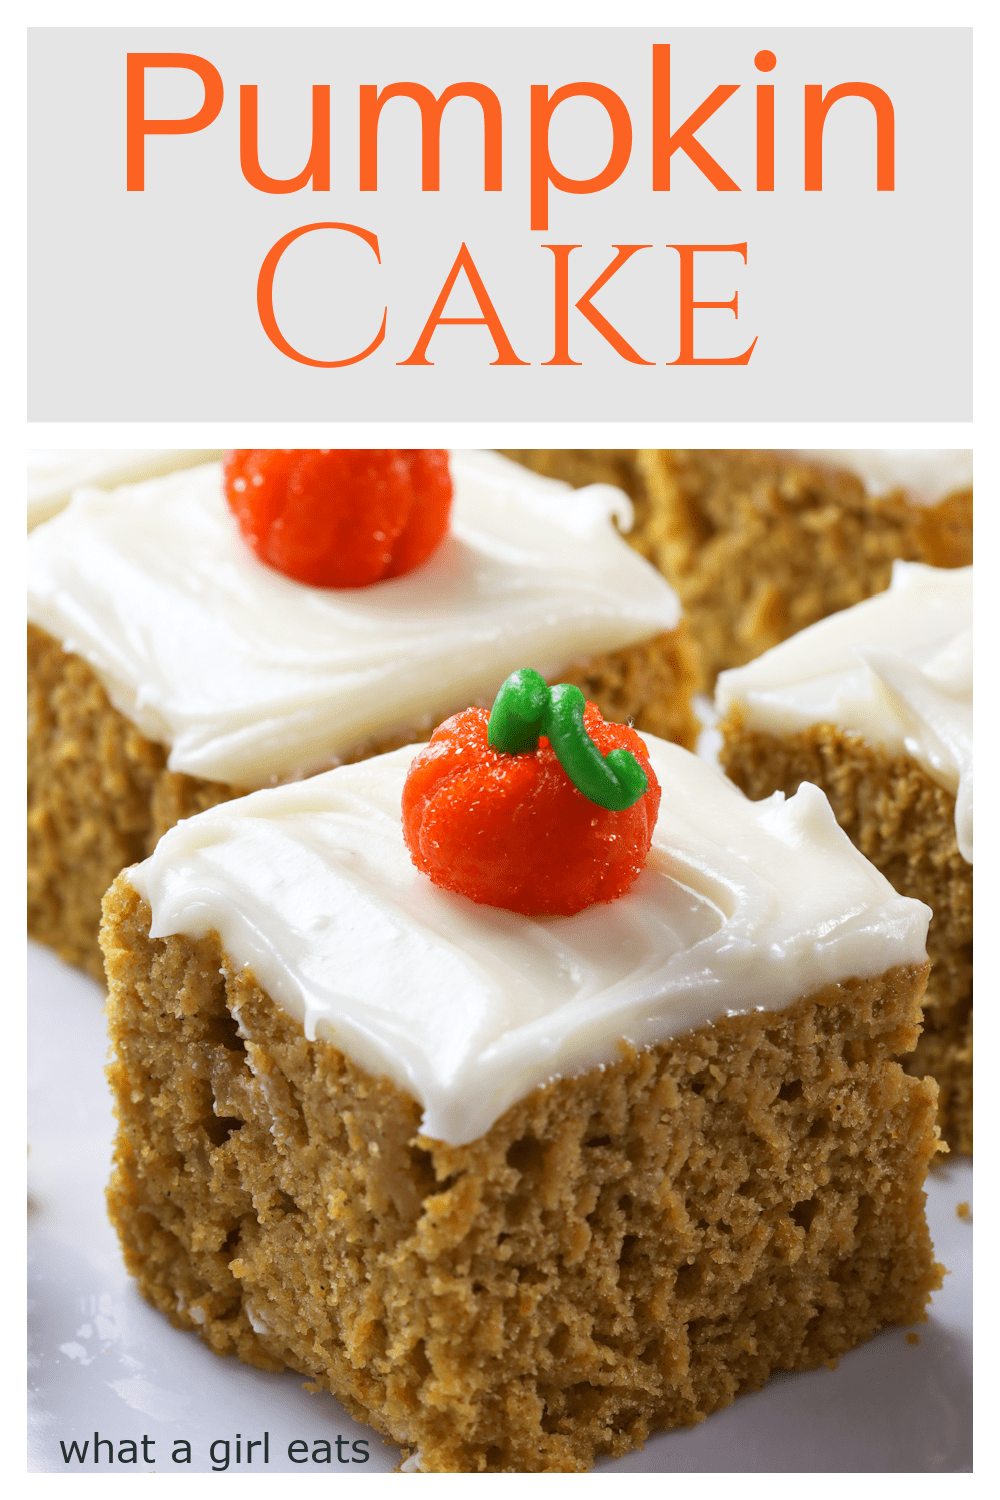 This pumpkin cake with rich cream cheese frosting is a moist, delicious and easy snacking cake perfect for fall